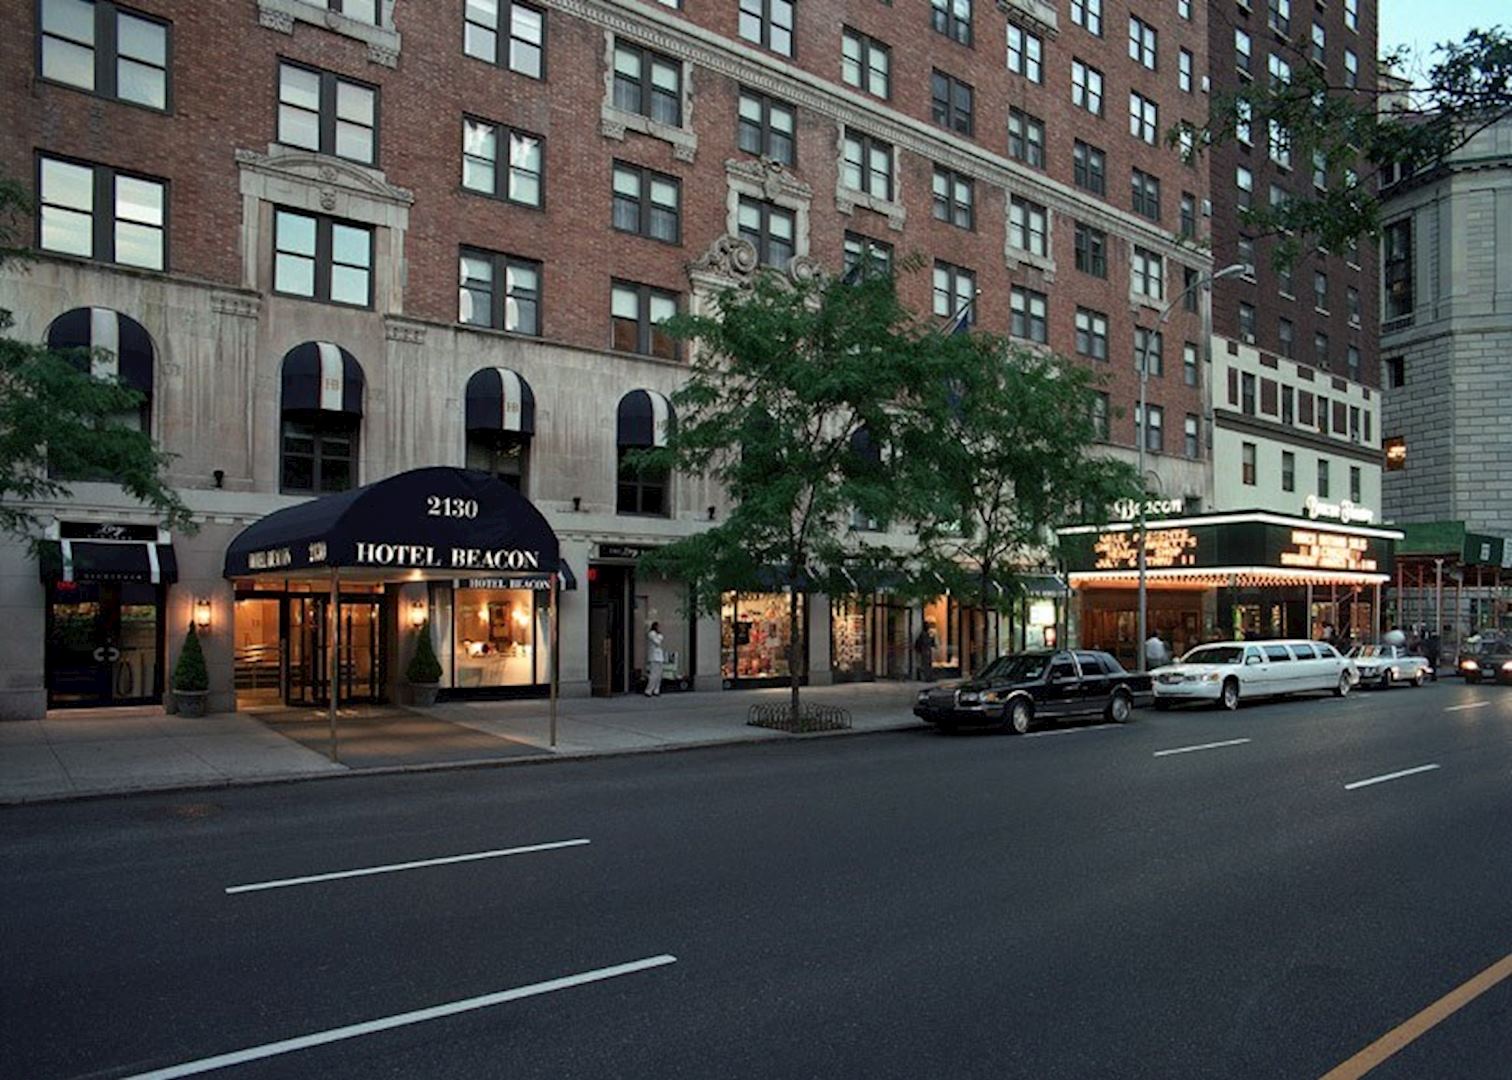 Hotel beacon hotels in new york audley travel for Hotel new york